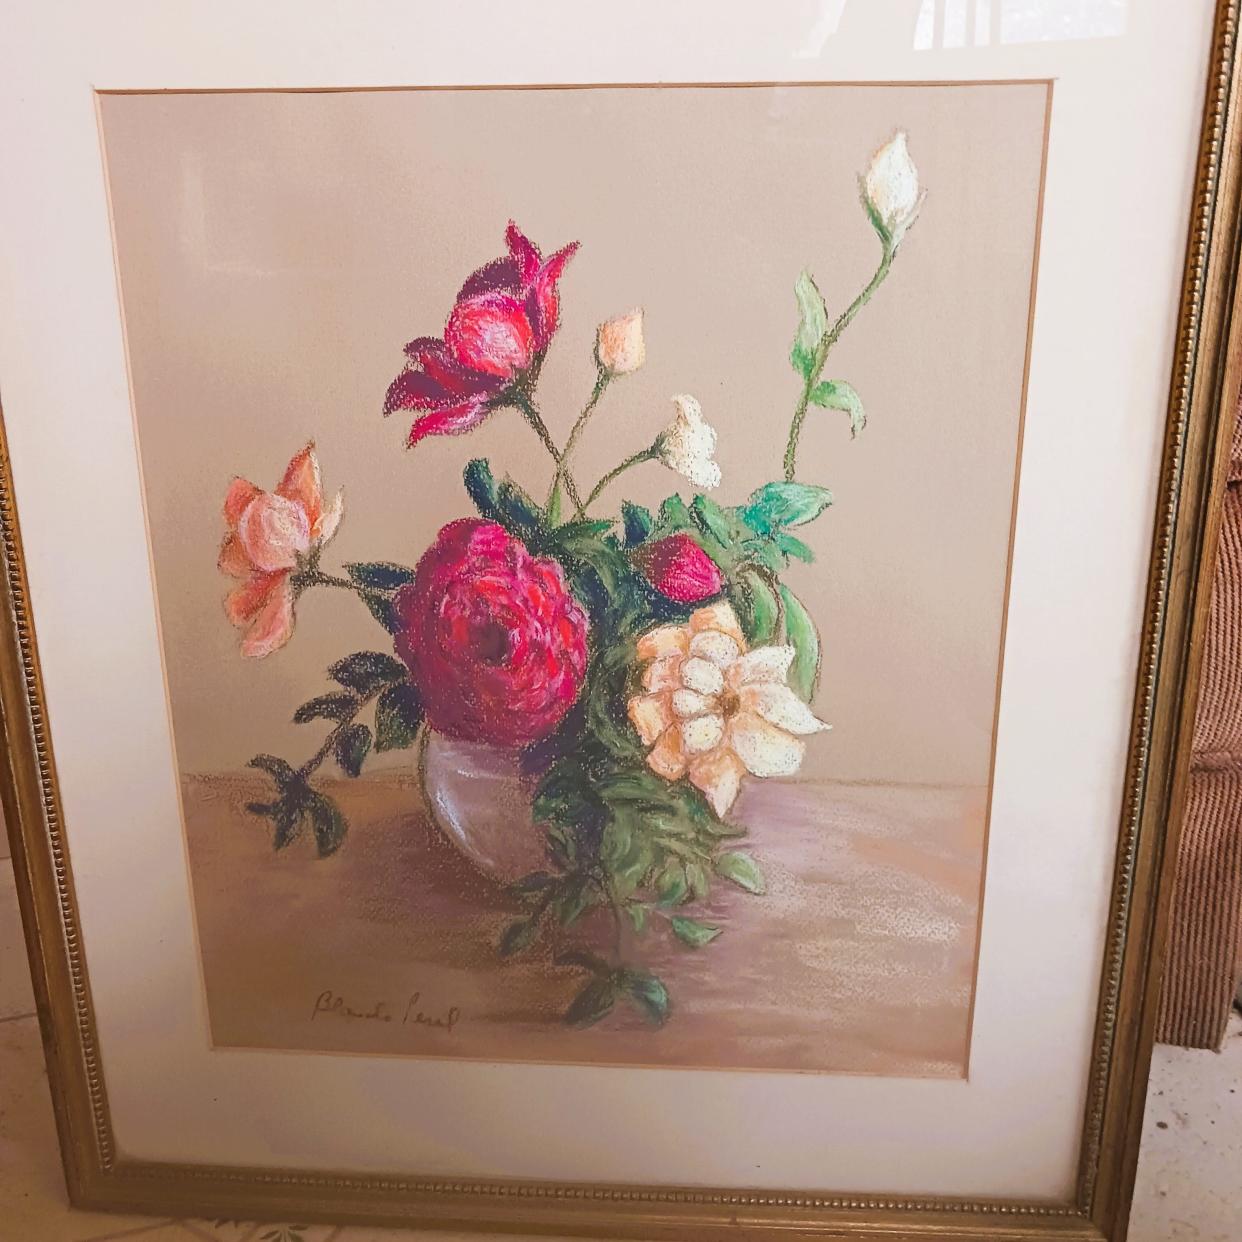 This painting of flowers done by Saralee's mother, Blanche Perel, hangs in the columnist's home, a reminder of one of the joys her often-sad mother shared.